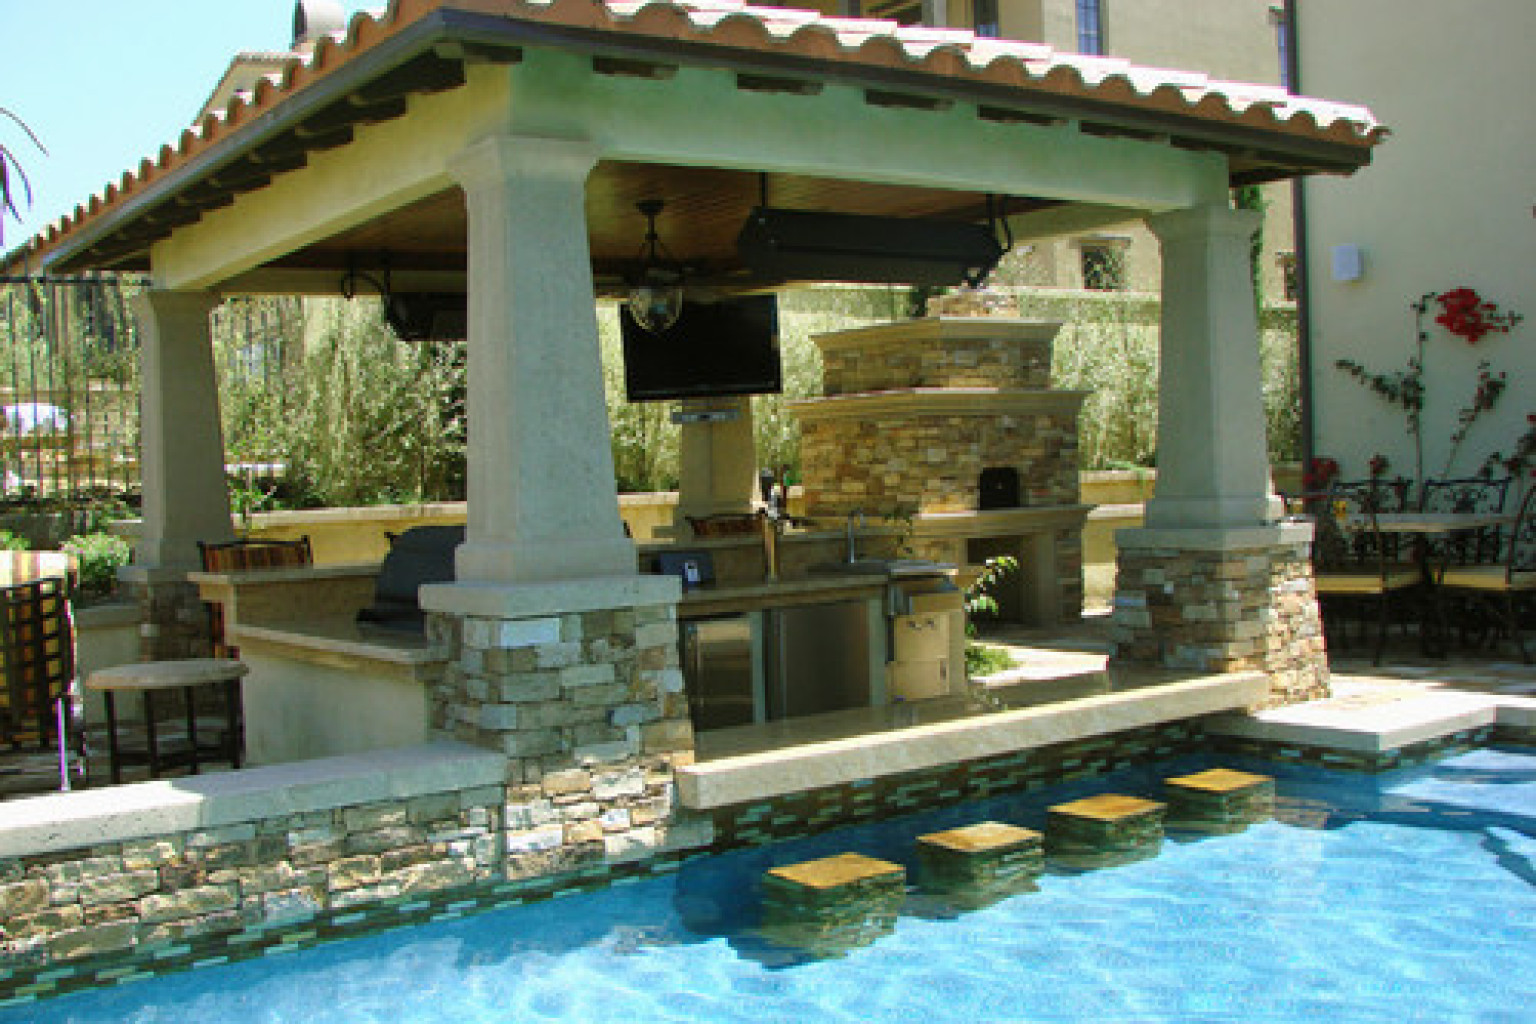 outdoor pool and bar designs photo - 10